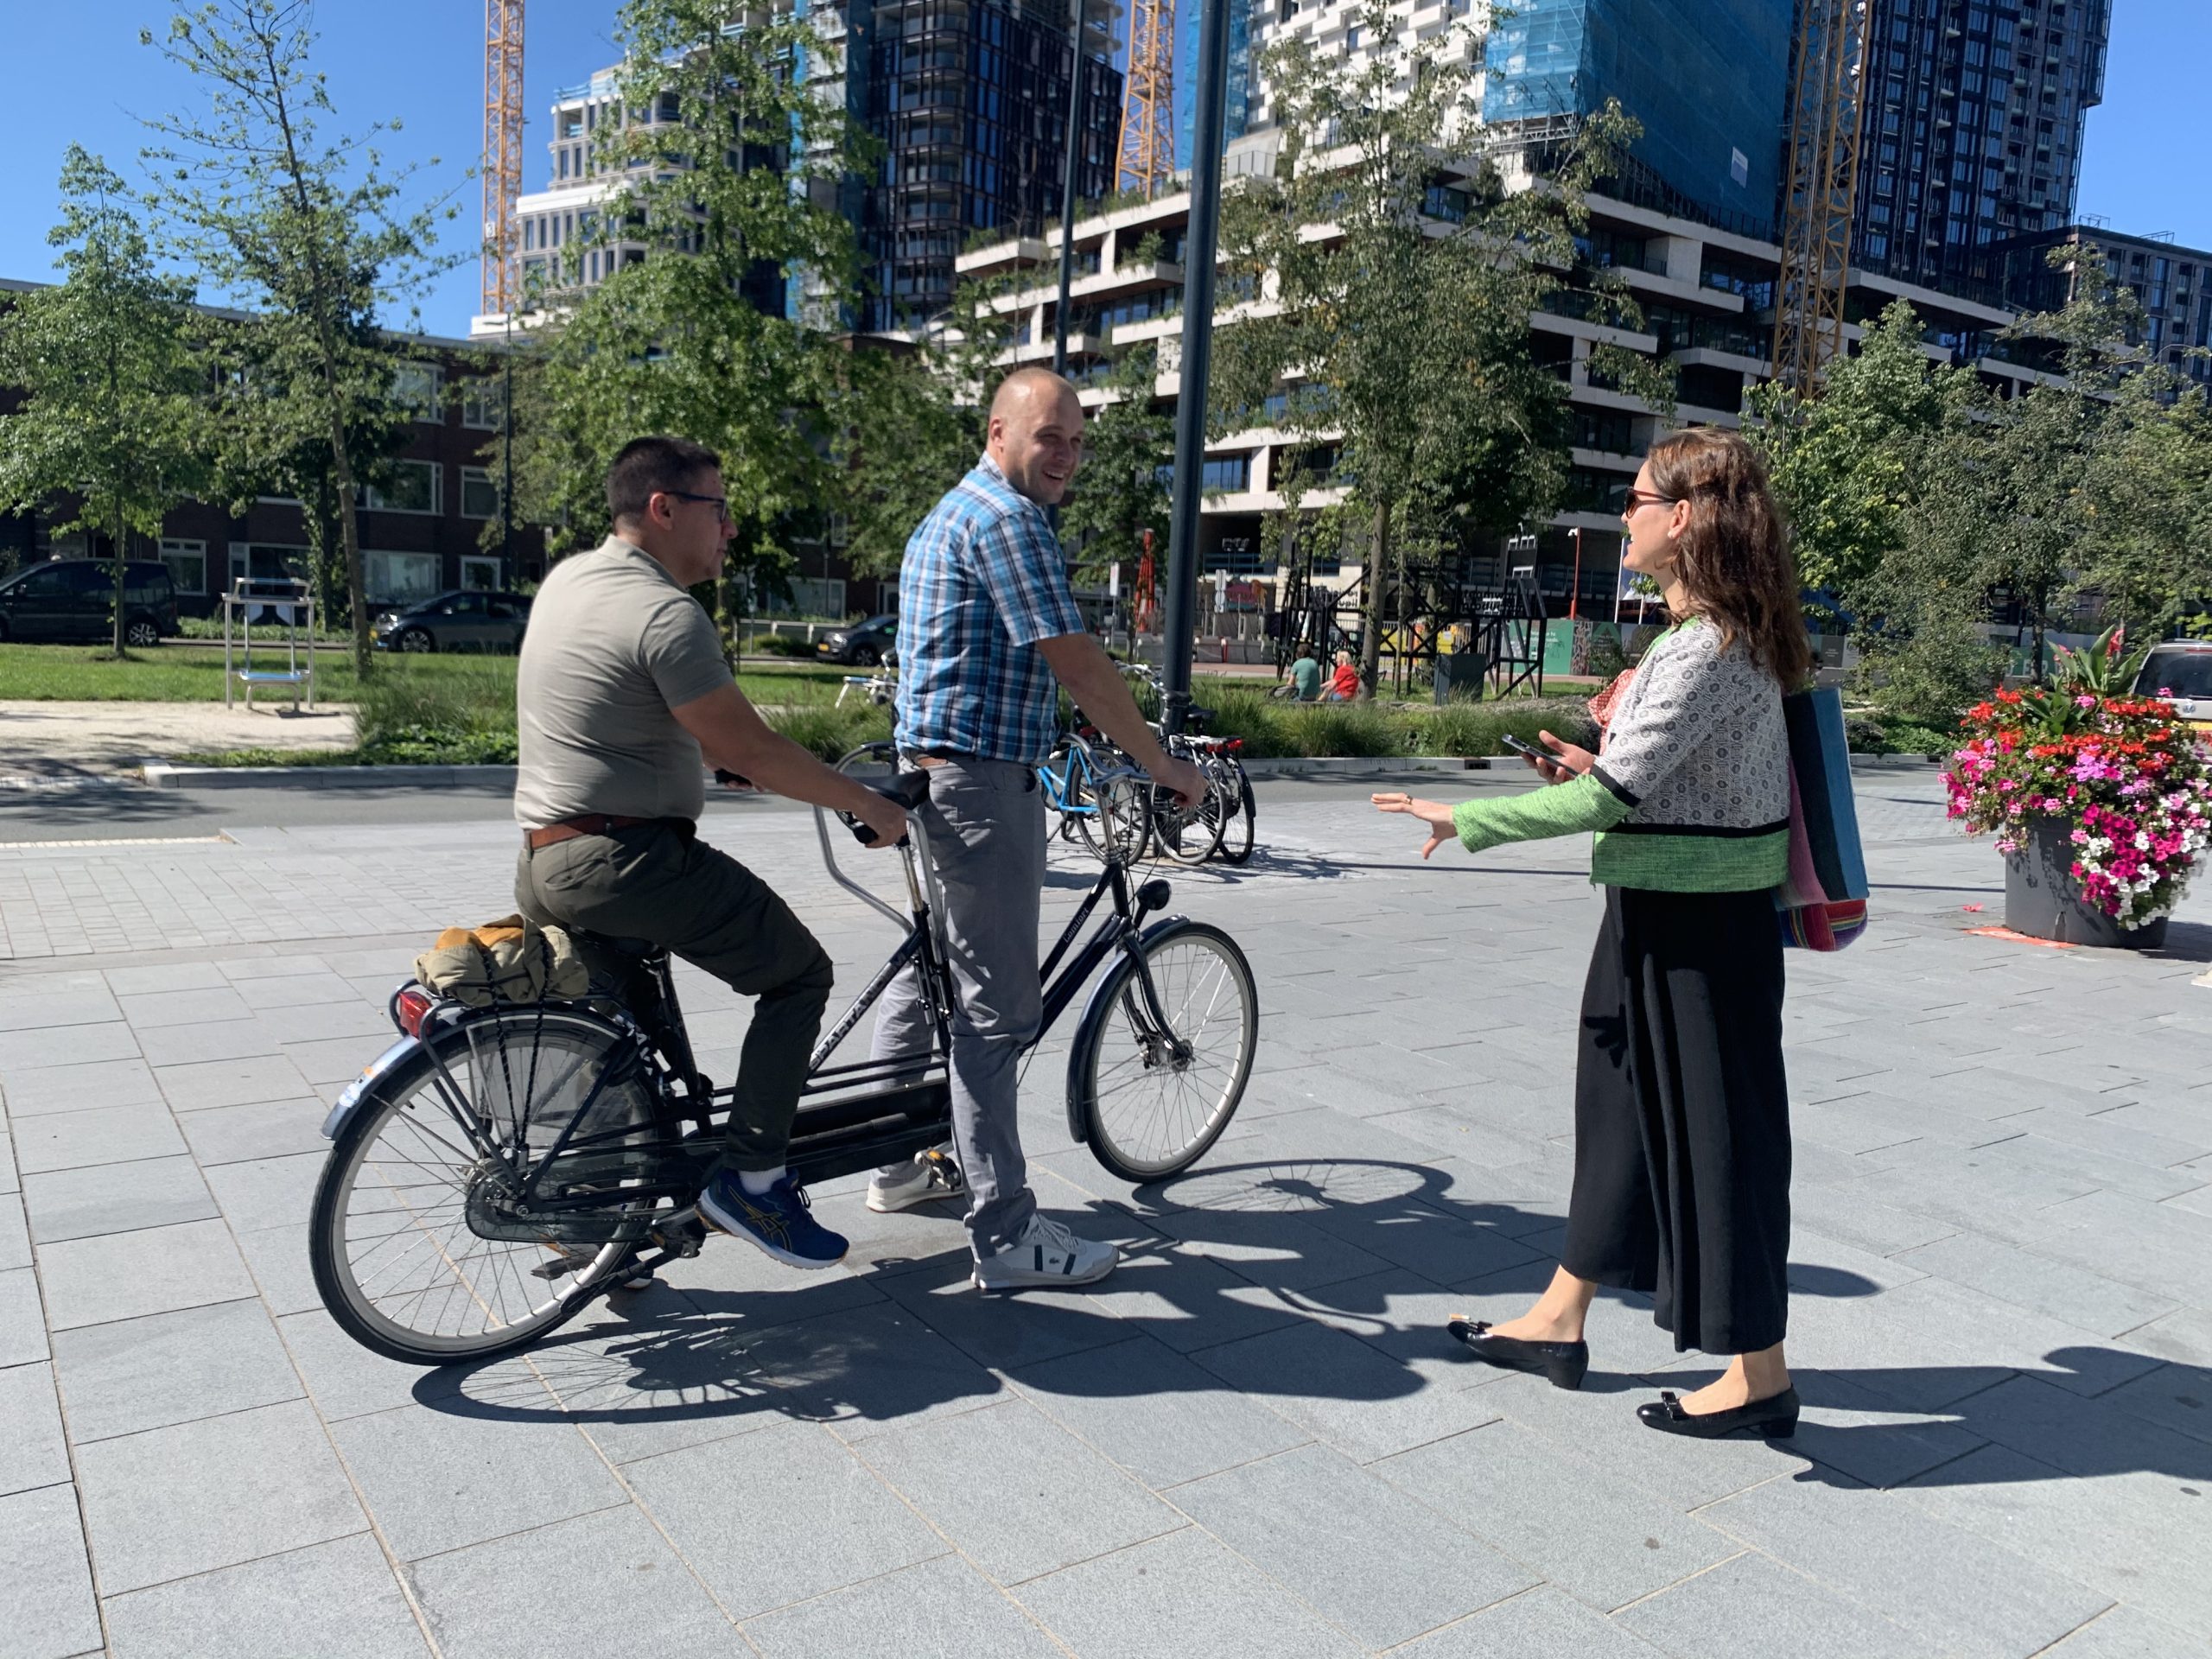 Two study visit participants on a tandem speaking to the Managing Director of the Dutch Cycling Embassy Skadi Tirpak.